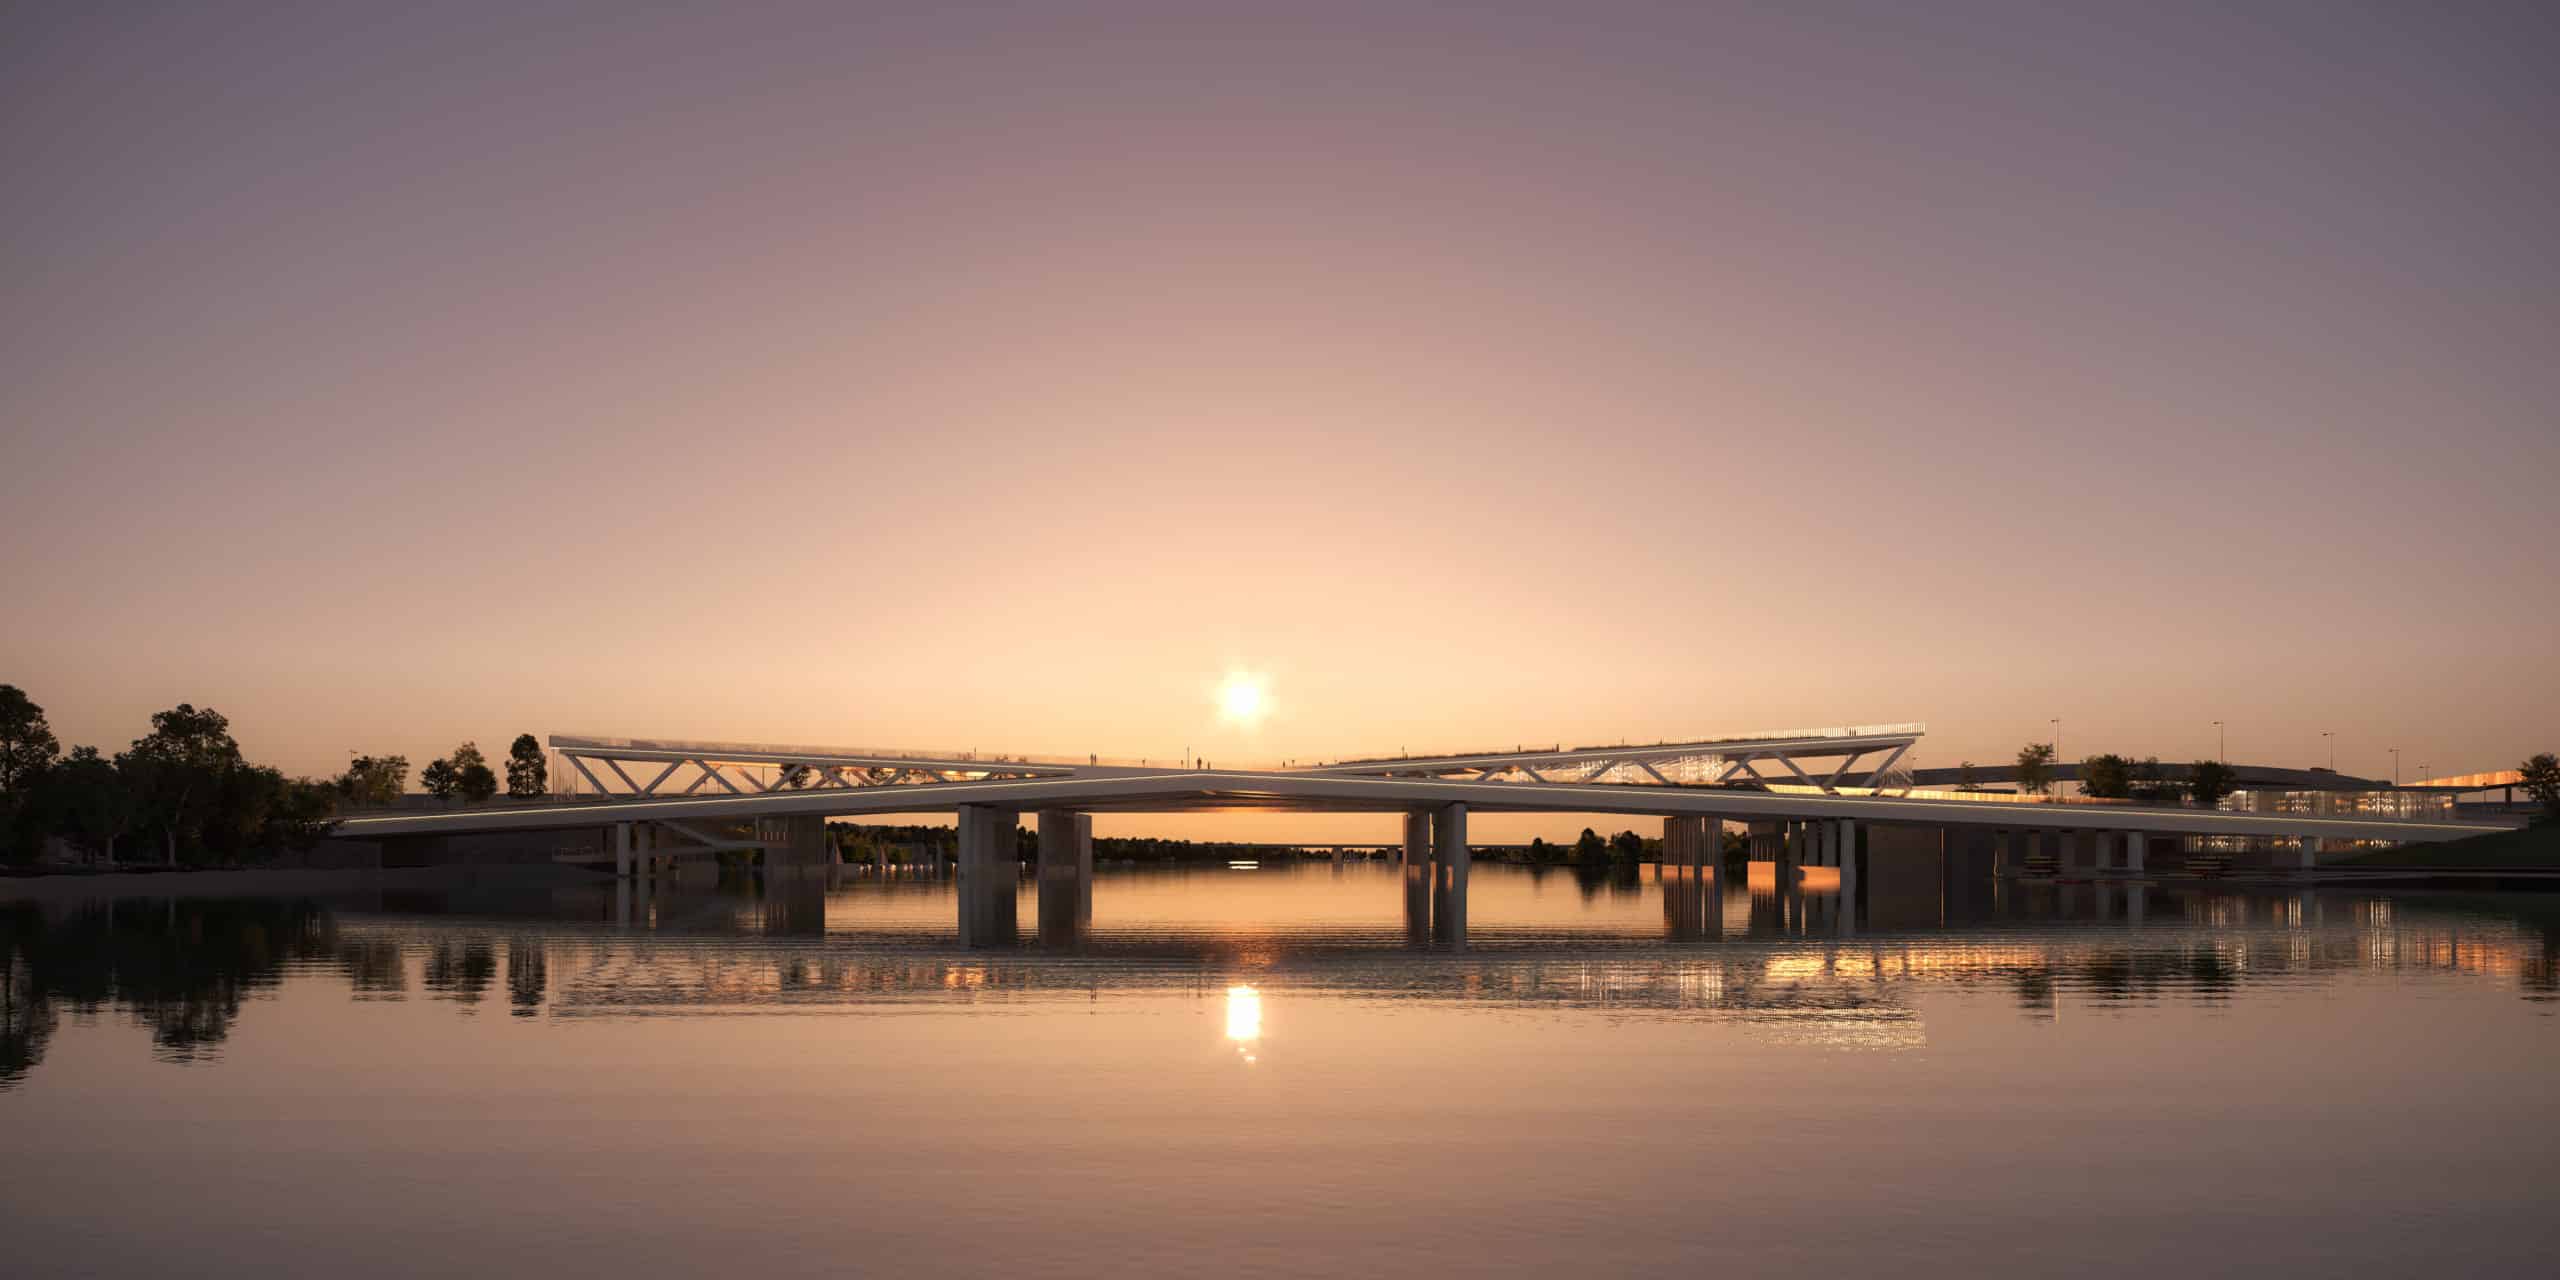 A bridge over a body of water at sunset.